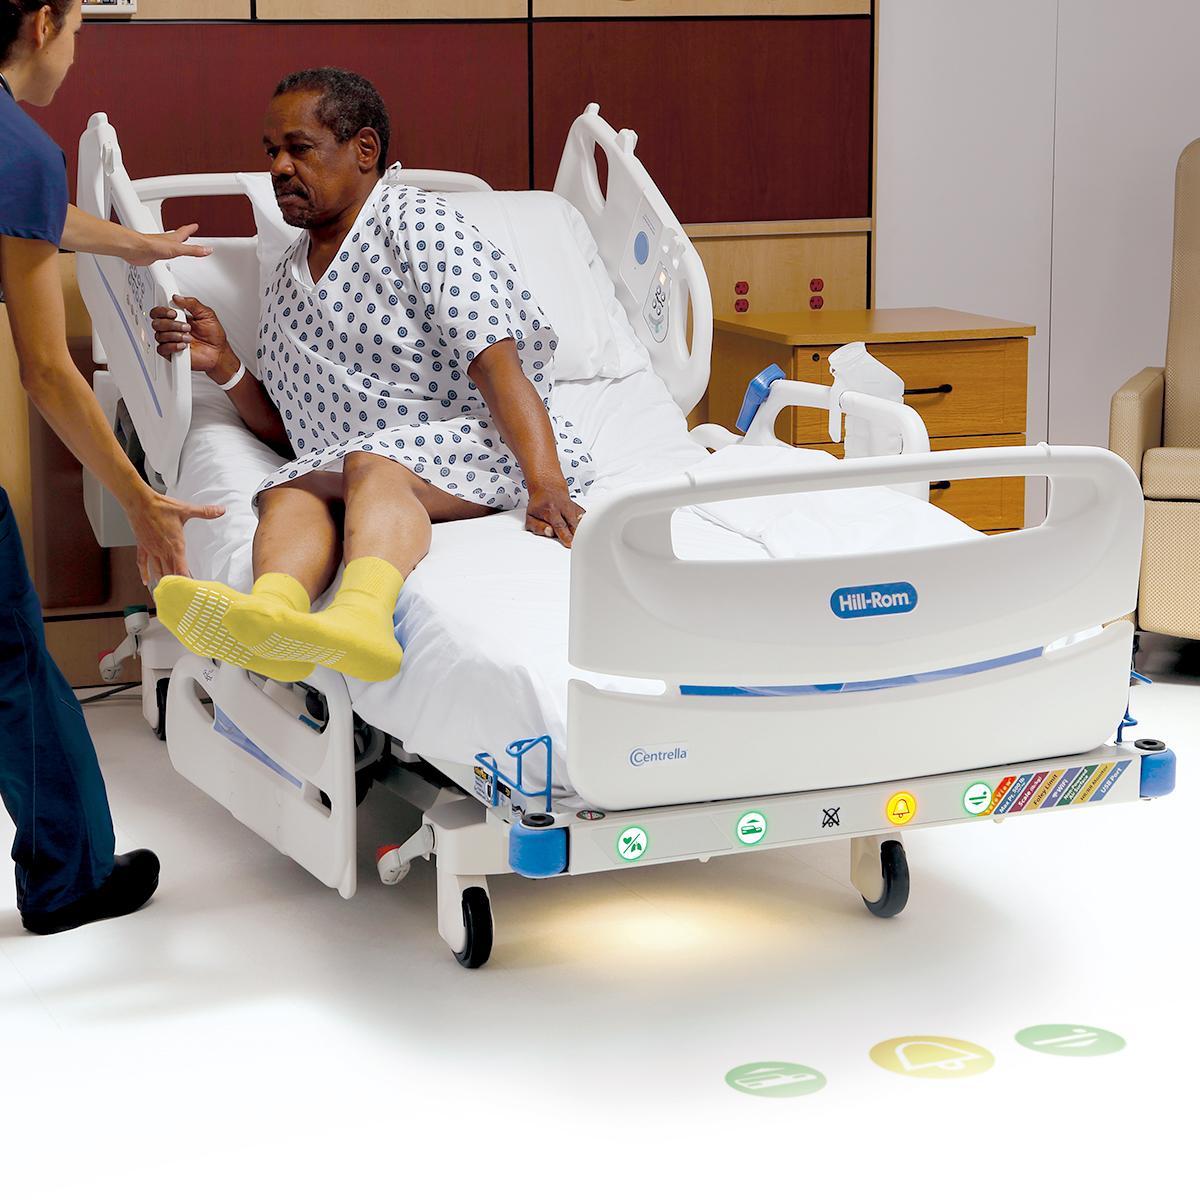 Female hospital clinician helps male patient exit the Centrella Smart+ Bed